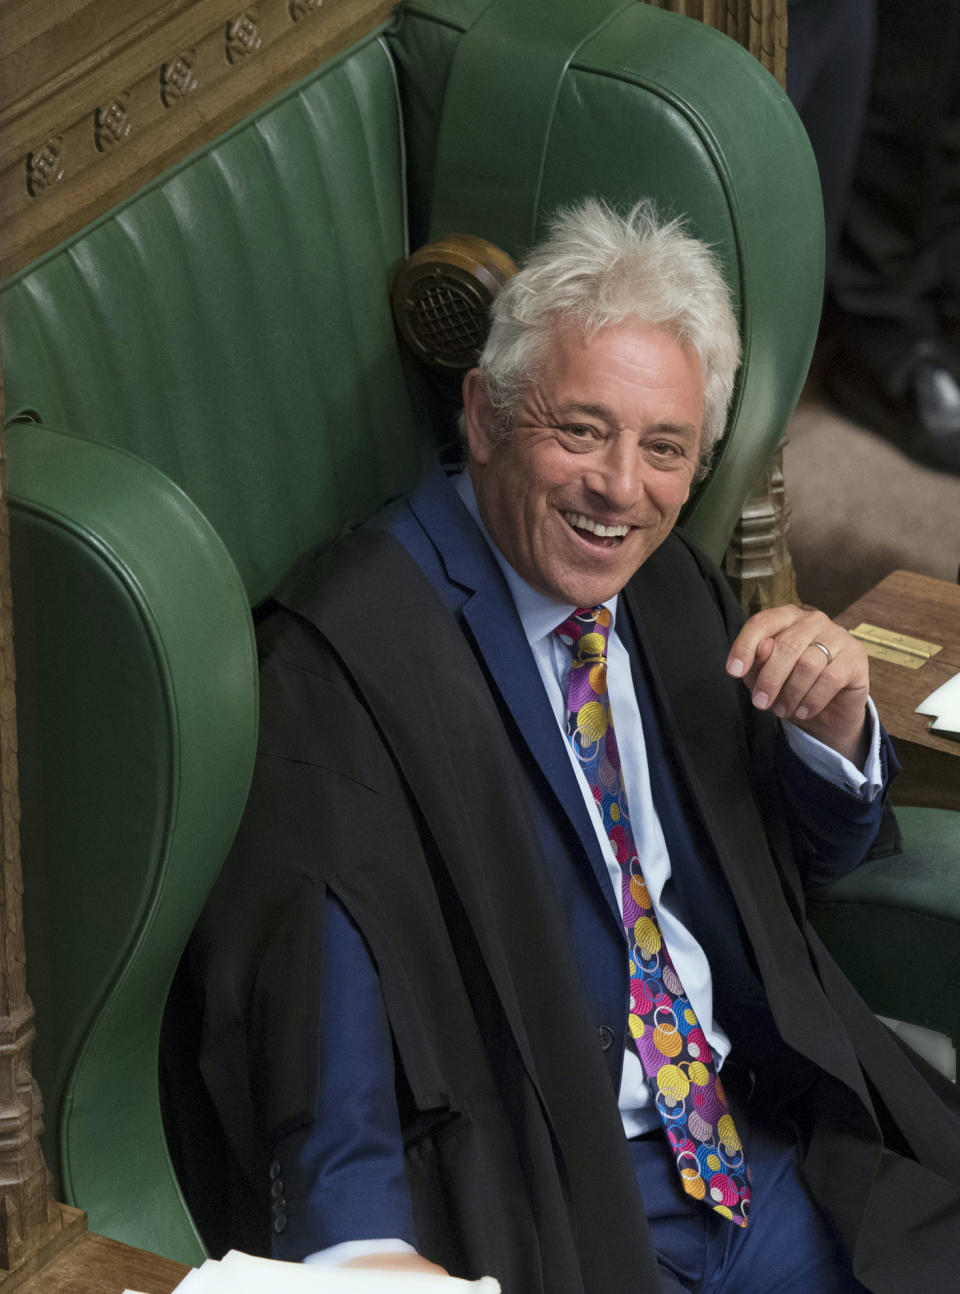 FILE - In this Monday, Sept. 9, 2019 file photo released by the House of Commons, speaker of the House John Bercow laughs after announcing he will be standing down, in the House of Commons in London. The speaker of Britain’s House of Commons has become a global celebrity for his loud ties, even louder voice and star turn at the center of Britain’s Brexit drama. On Thursday Oct. 31, 2019, he is stepping down after 10 years in the job. (Jessica Taylor/House of Commons via AP, File)